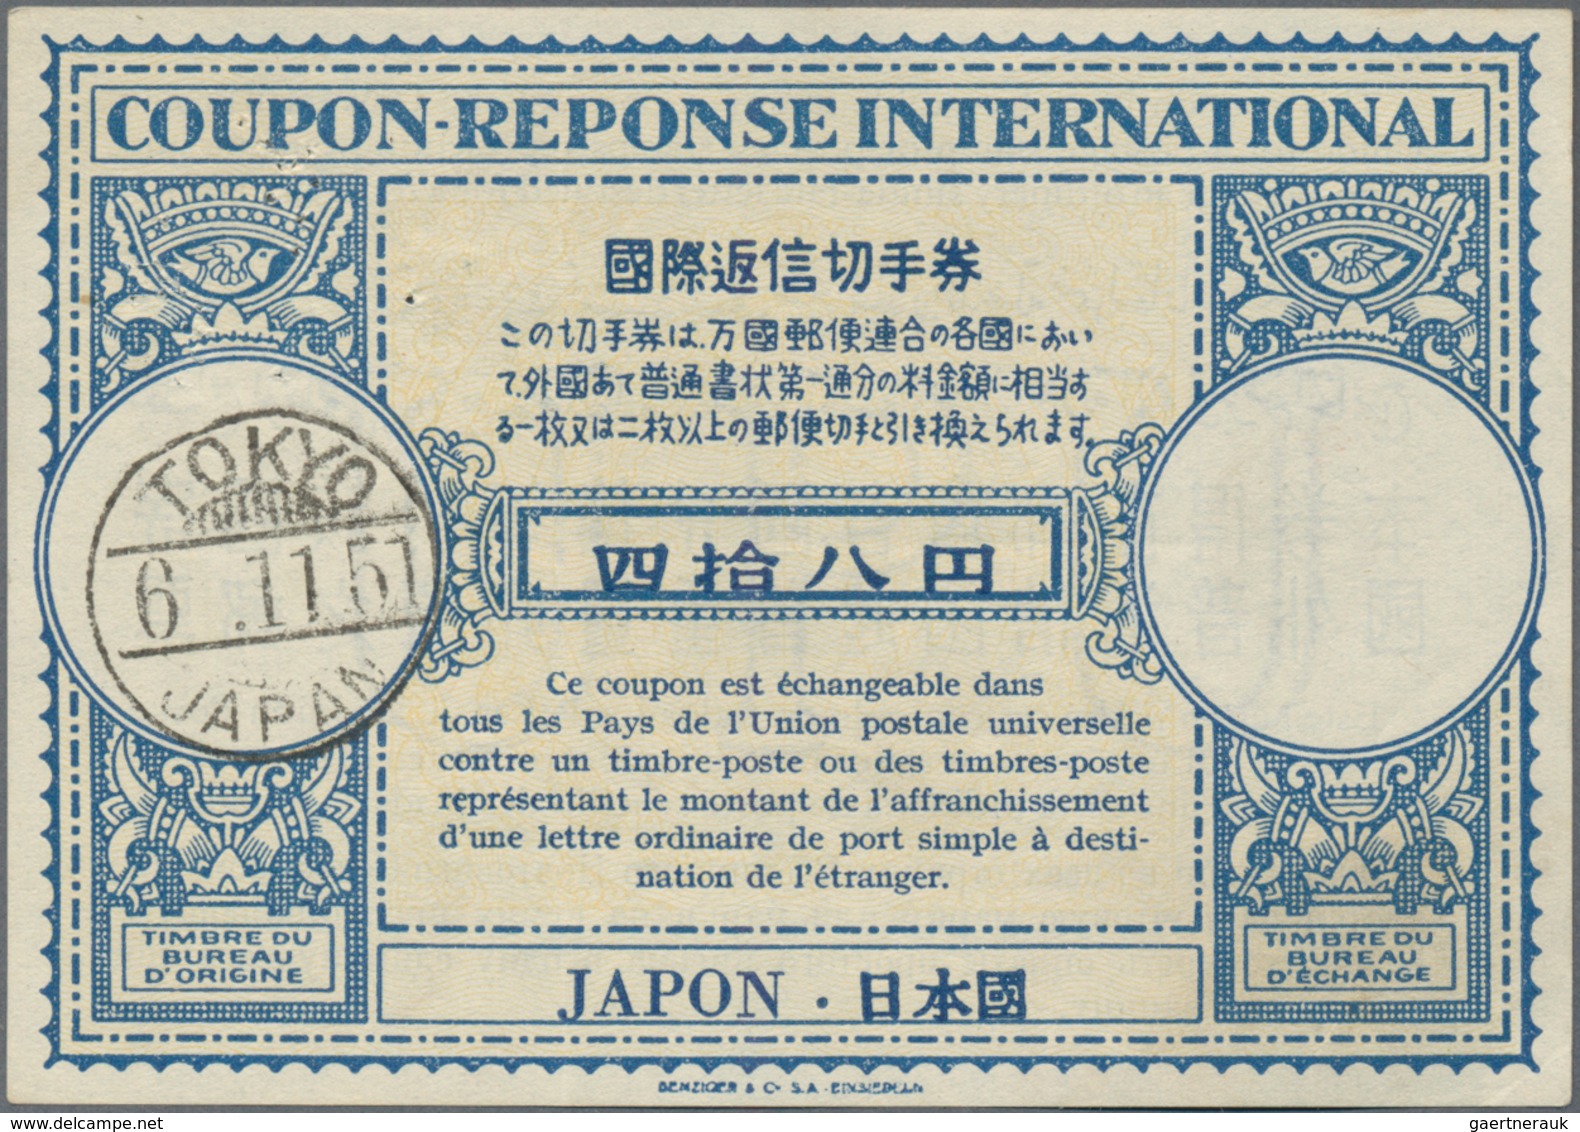 Japan: 1892/1951, covers/used ppc (35) inc. mourning cover, Etscheid card pmkd. Ponape 1915 (Nanyo S